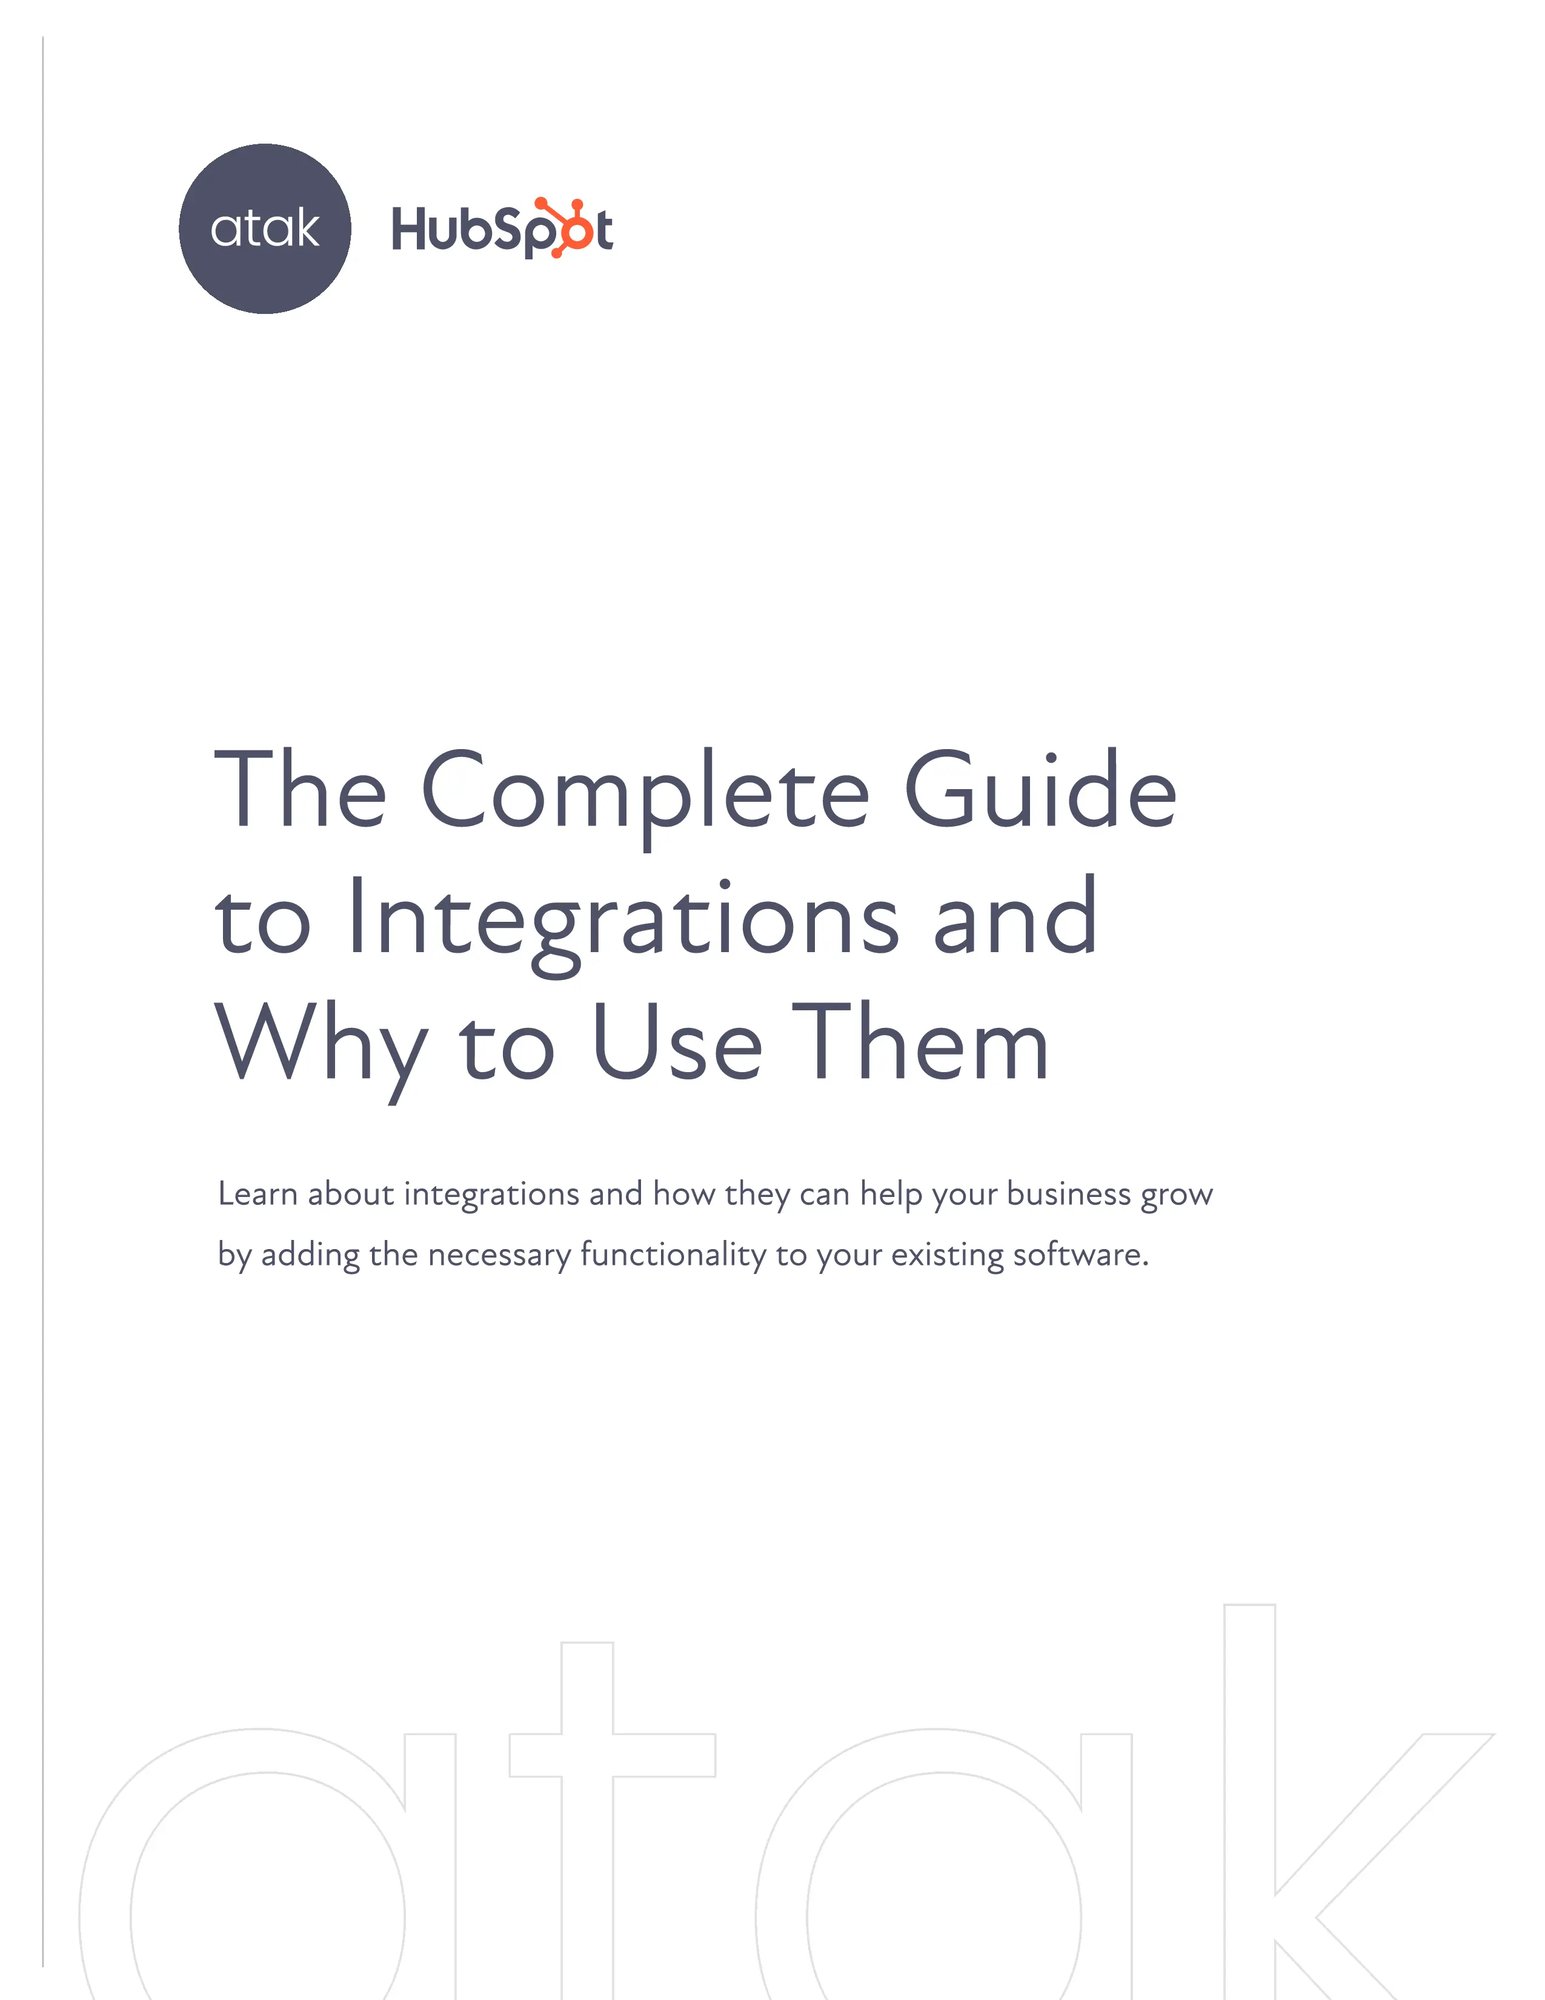 The Complete Guide to Integrations and Why to Use Them-1